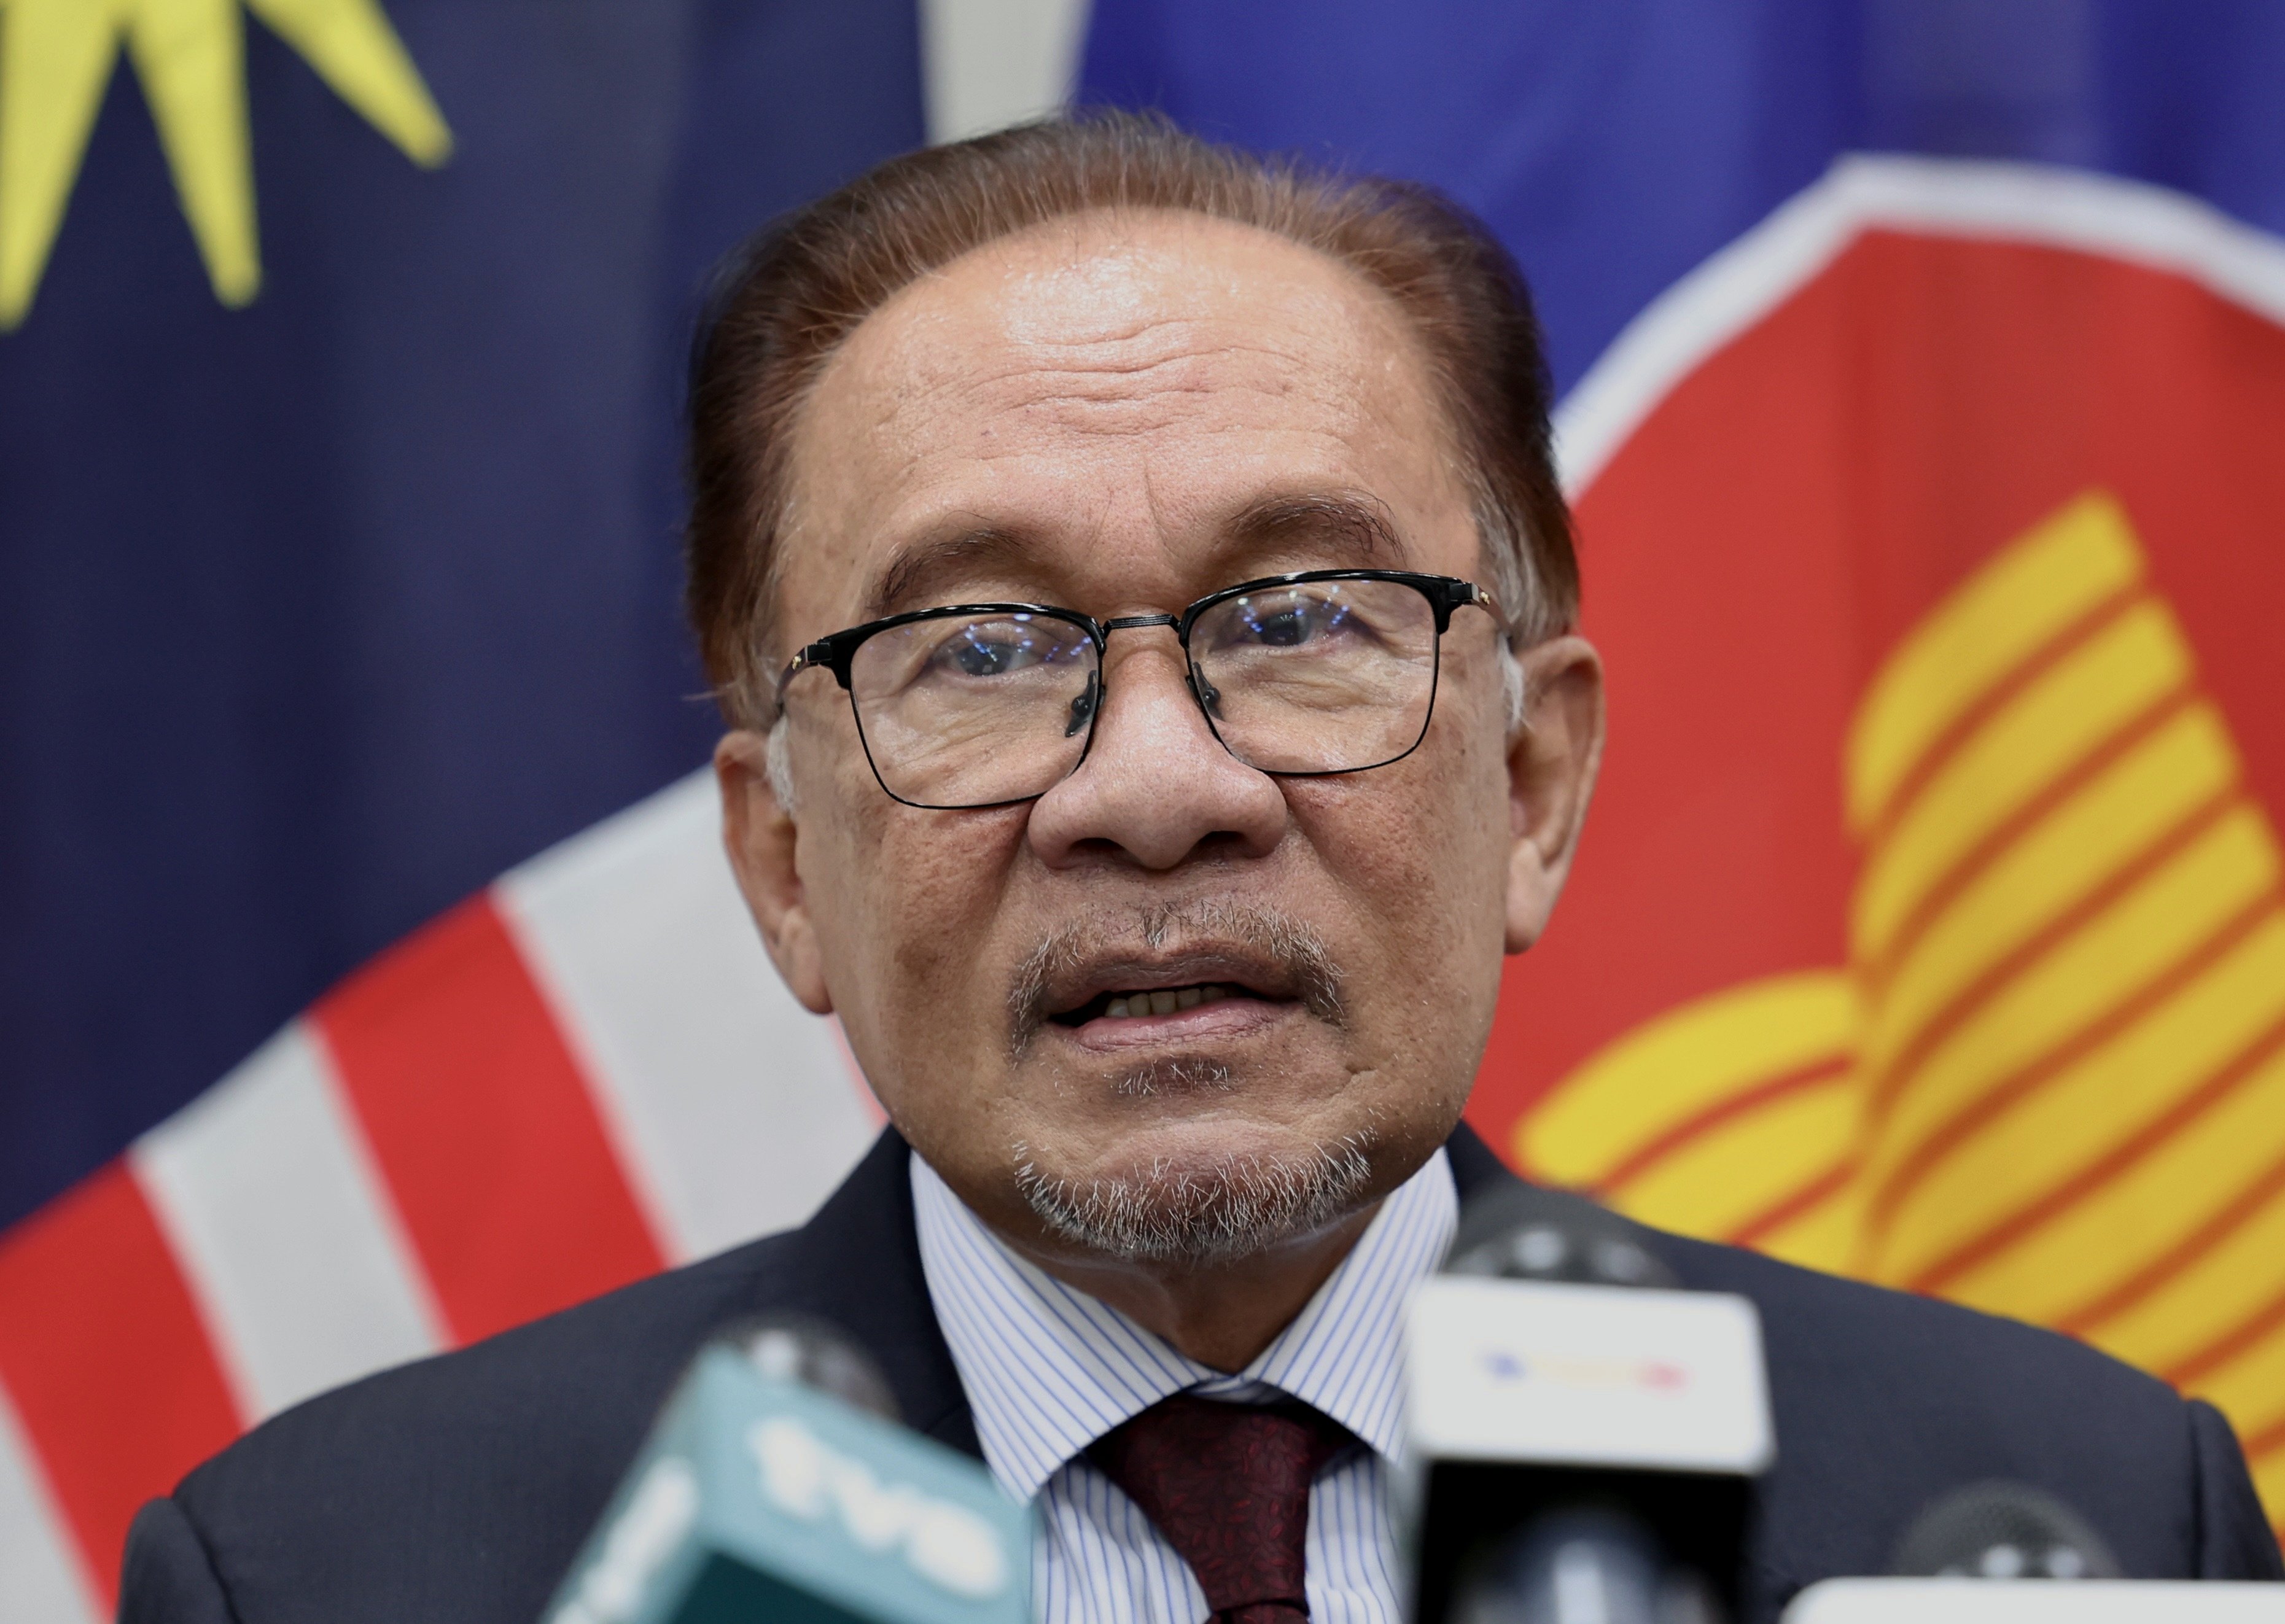 Malaysian Prime Minister Anwar Ibrahim speaks to the media last week after a session of the 43rd Asean Summit in Jakarta. Despite exiting Anwar’s coalition, Syed Saddiq’s party said it would continue supporting the government’s reform efforts from the opposition bench when a supermajority is needed. Photo: Bernama/dpa